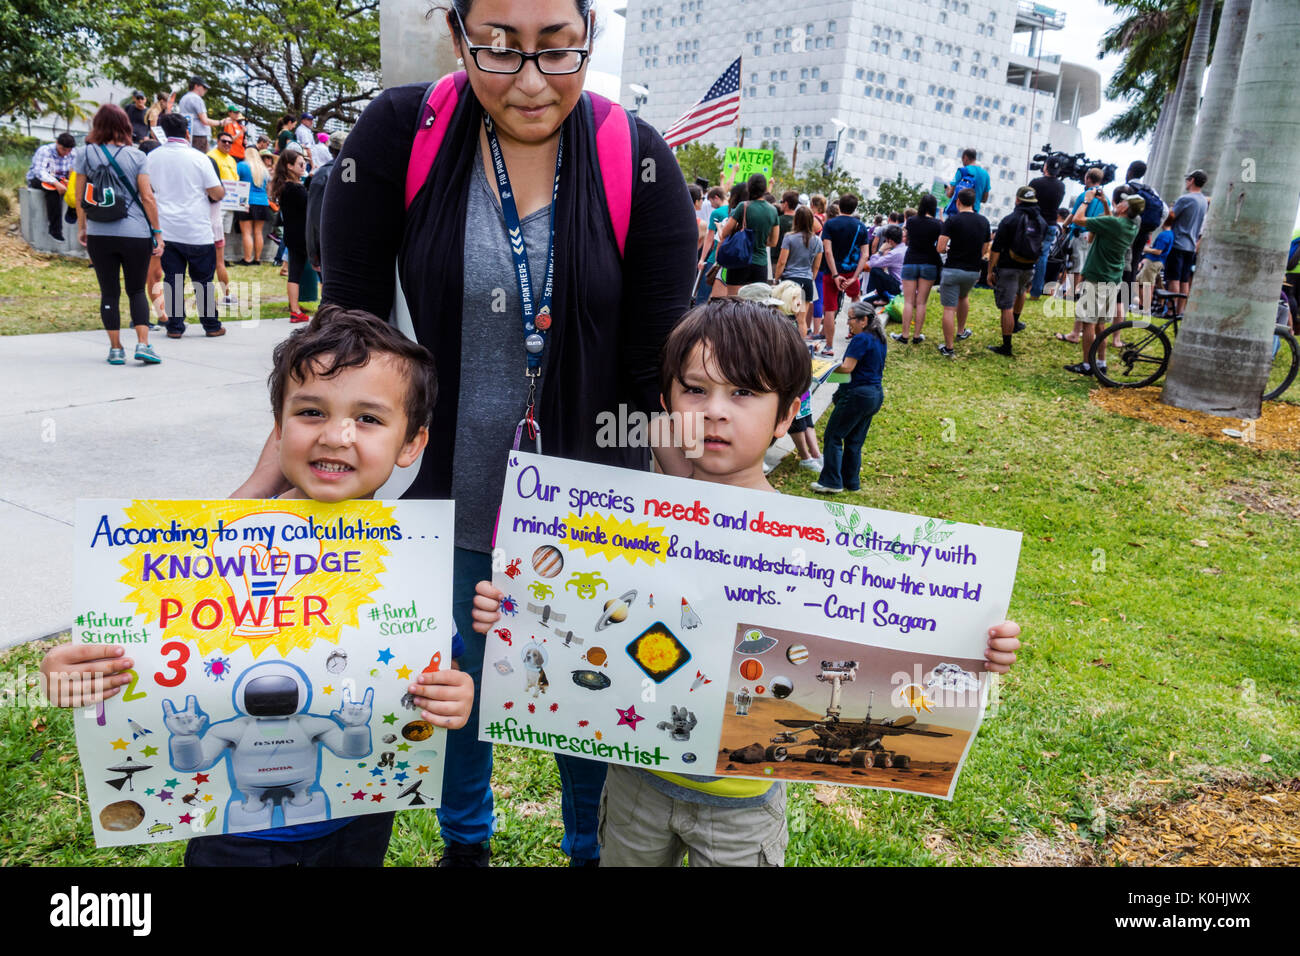 Miami Florida,Museum Park,March for Science,protest,rally,sign,poster,protester,Hispanic woman female women,boy boys,male kid kids child children youn Stock Photo